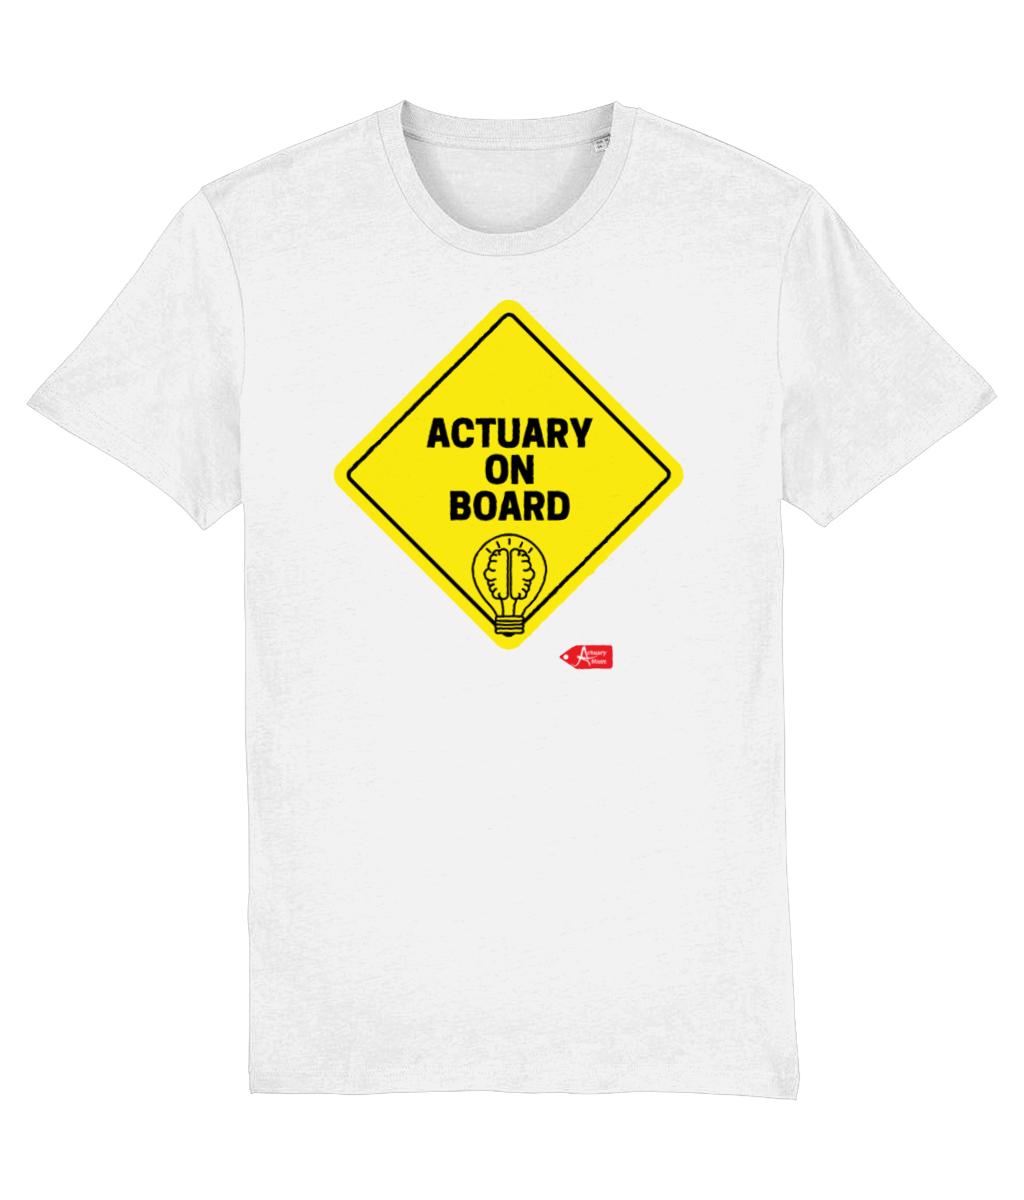 Actuary On Board T-Shirt (Black and White Variant)